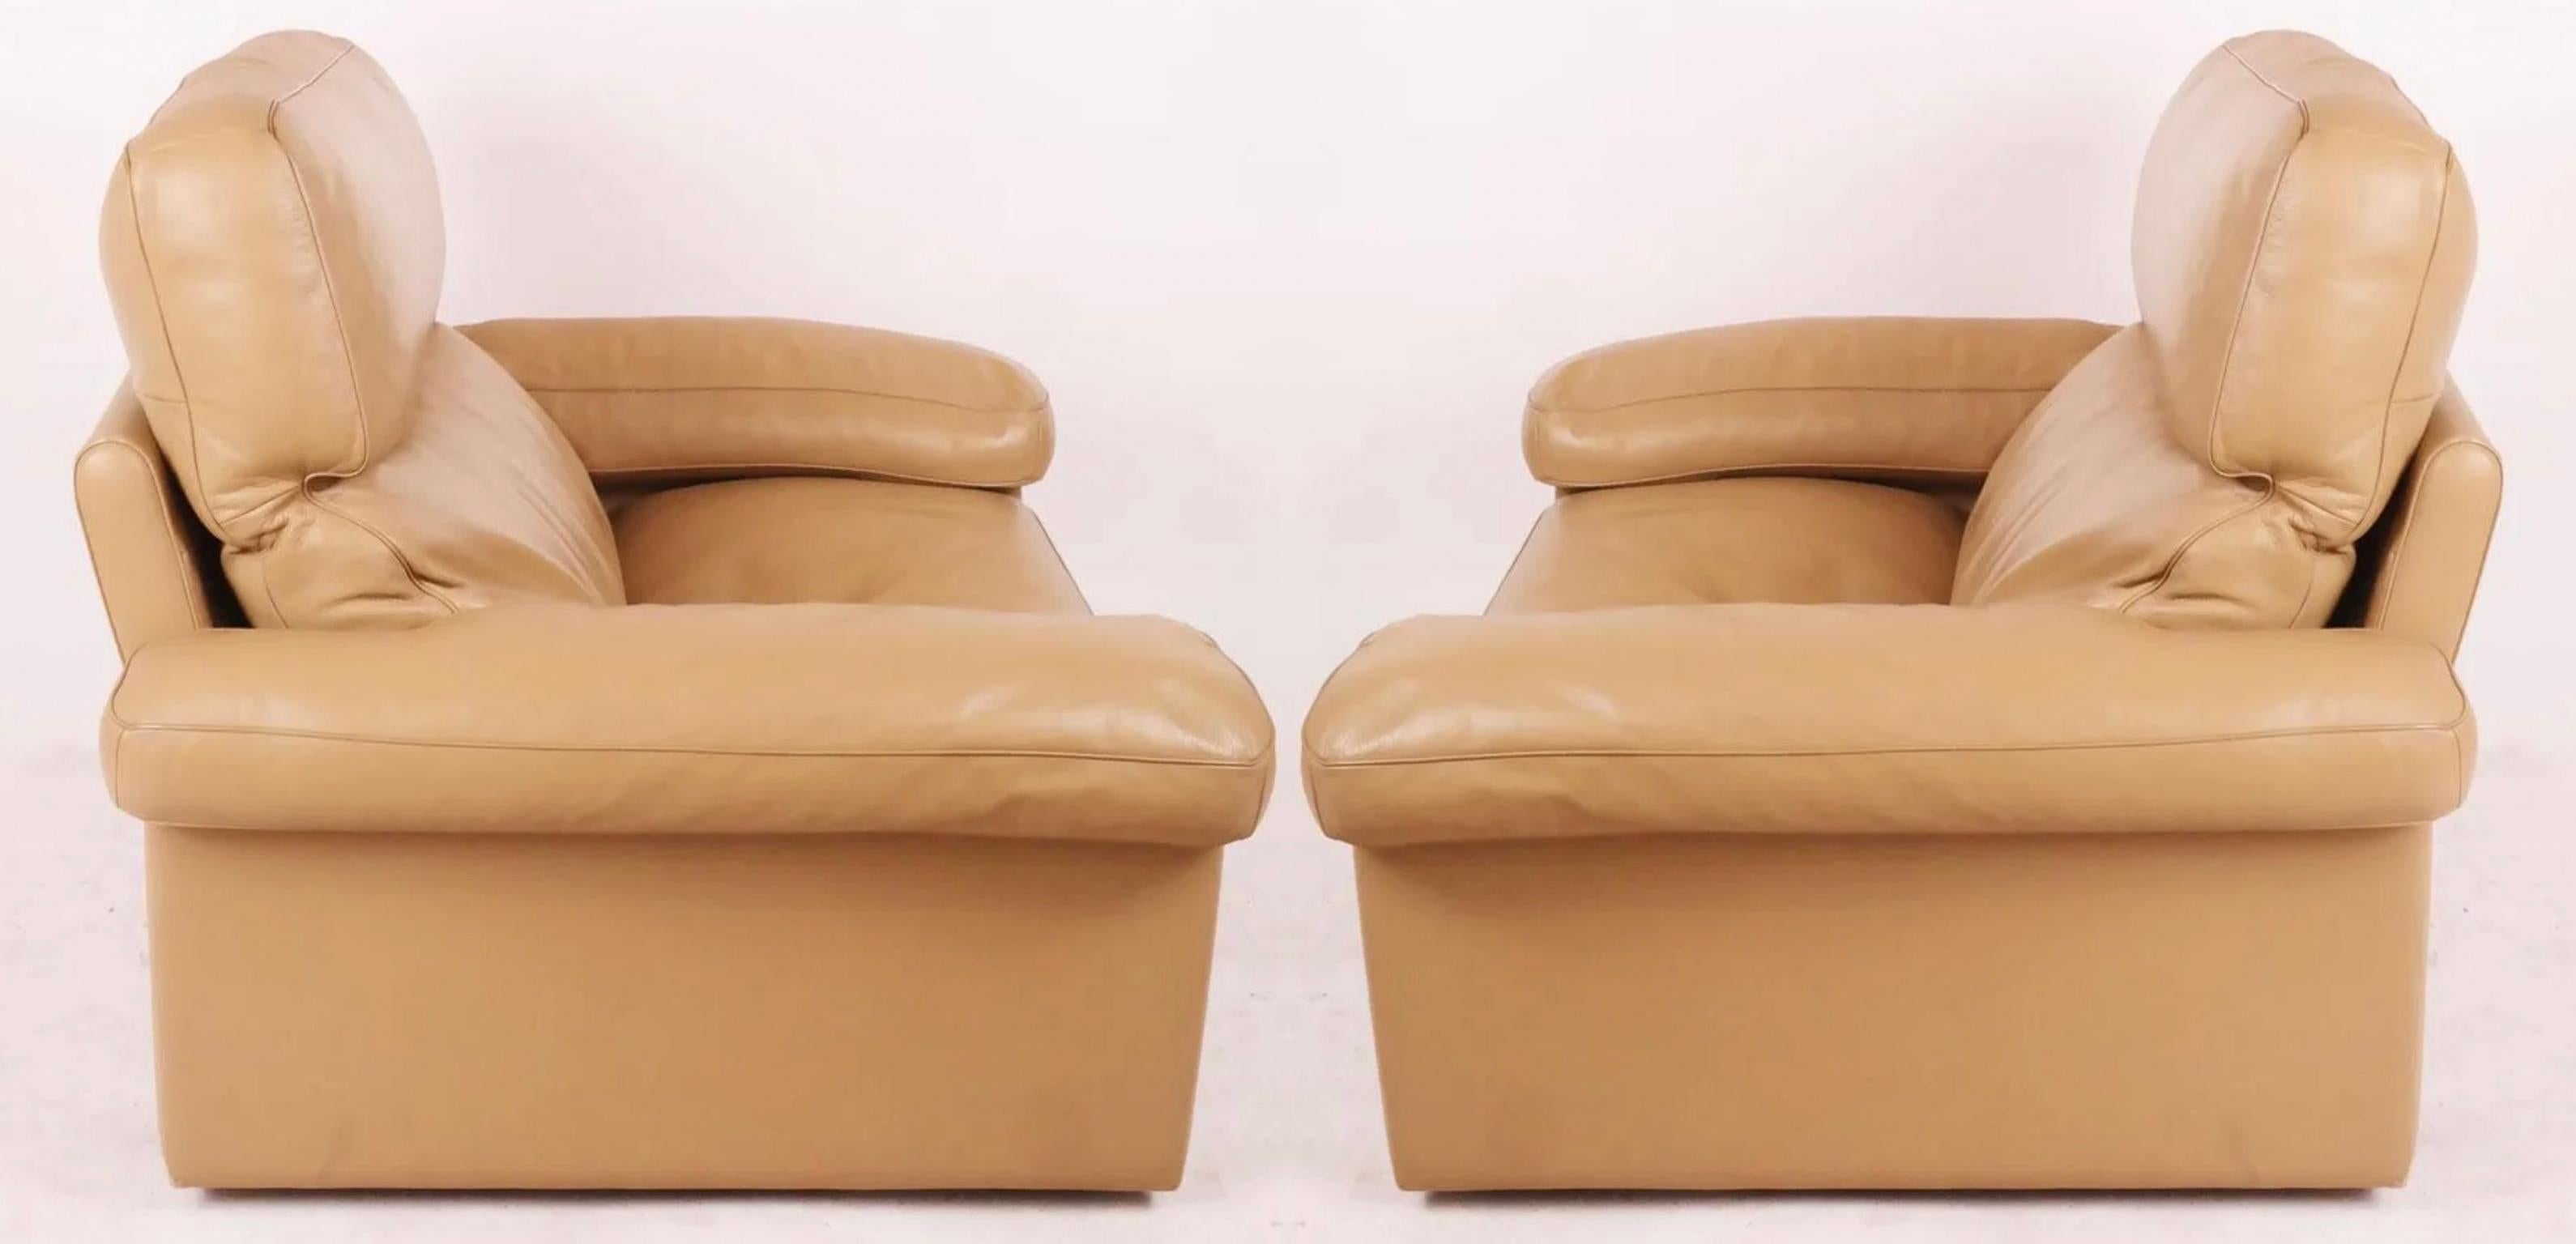 Italian Pair of Midcentury Tan Leather Lounge Chairs by Tito Agnoli for Poltrona Frau For Sale